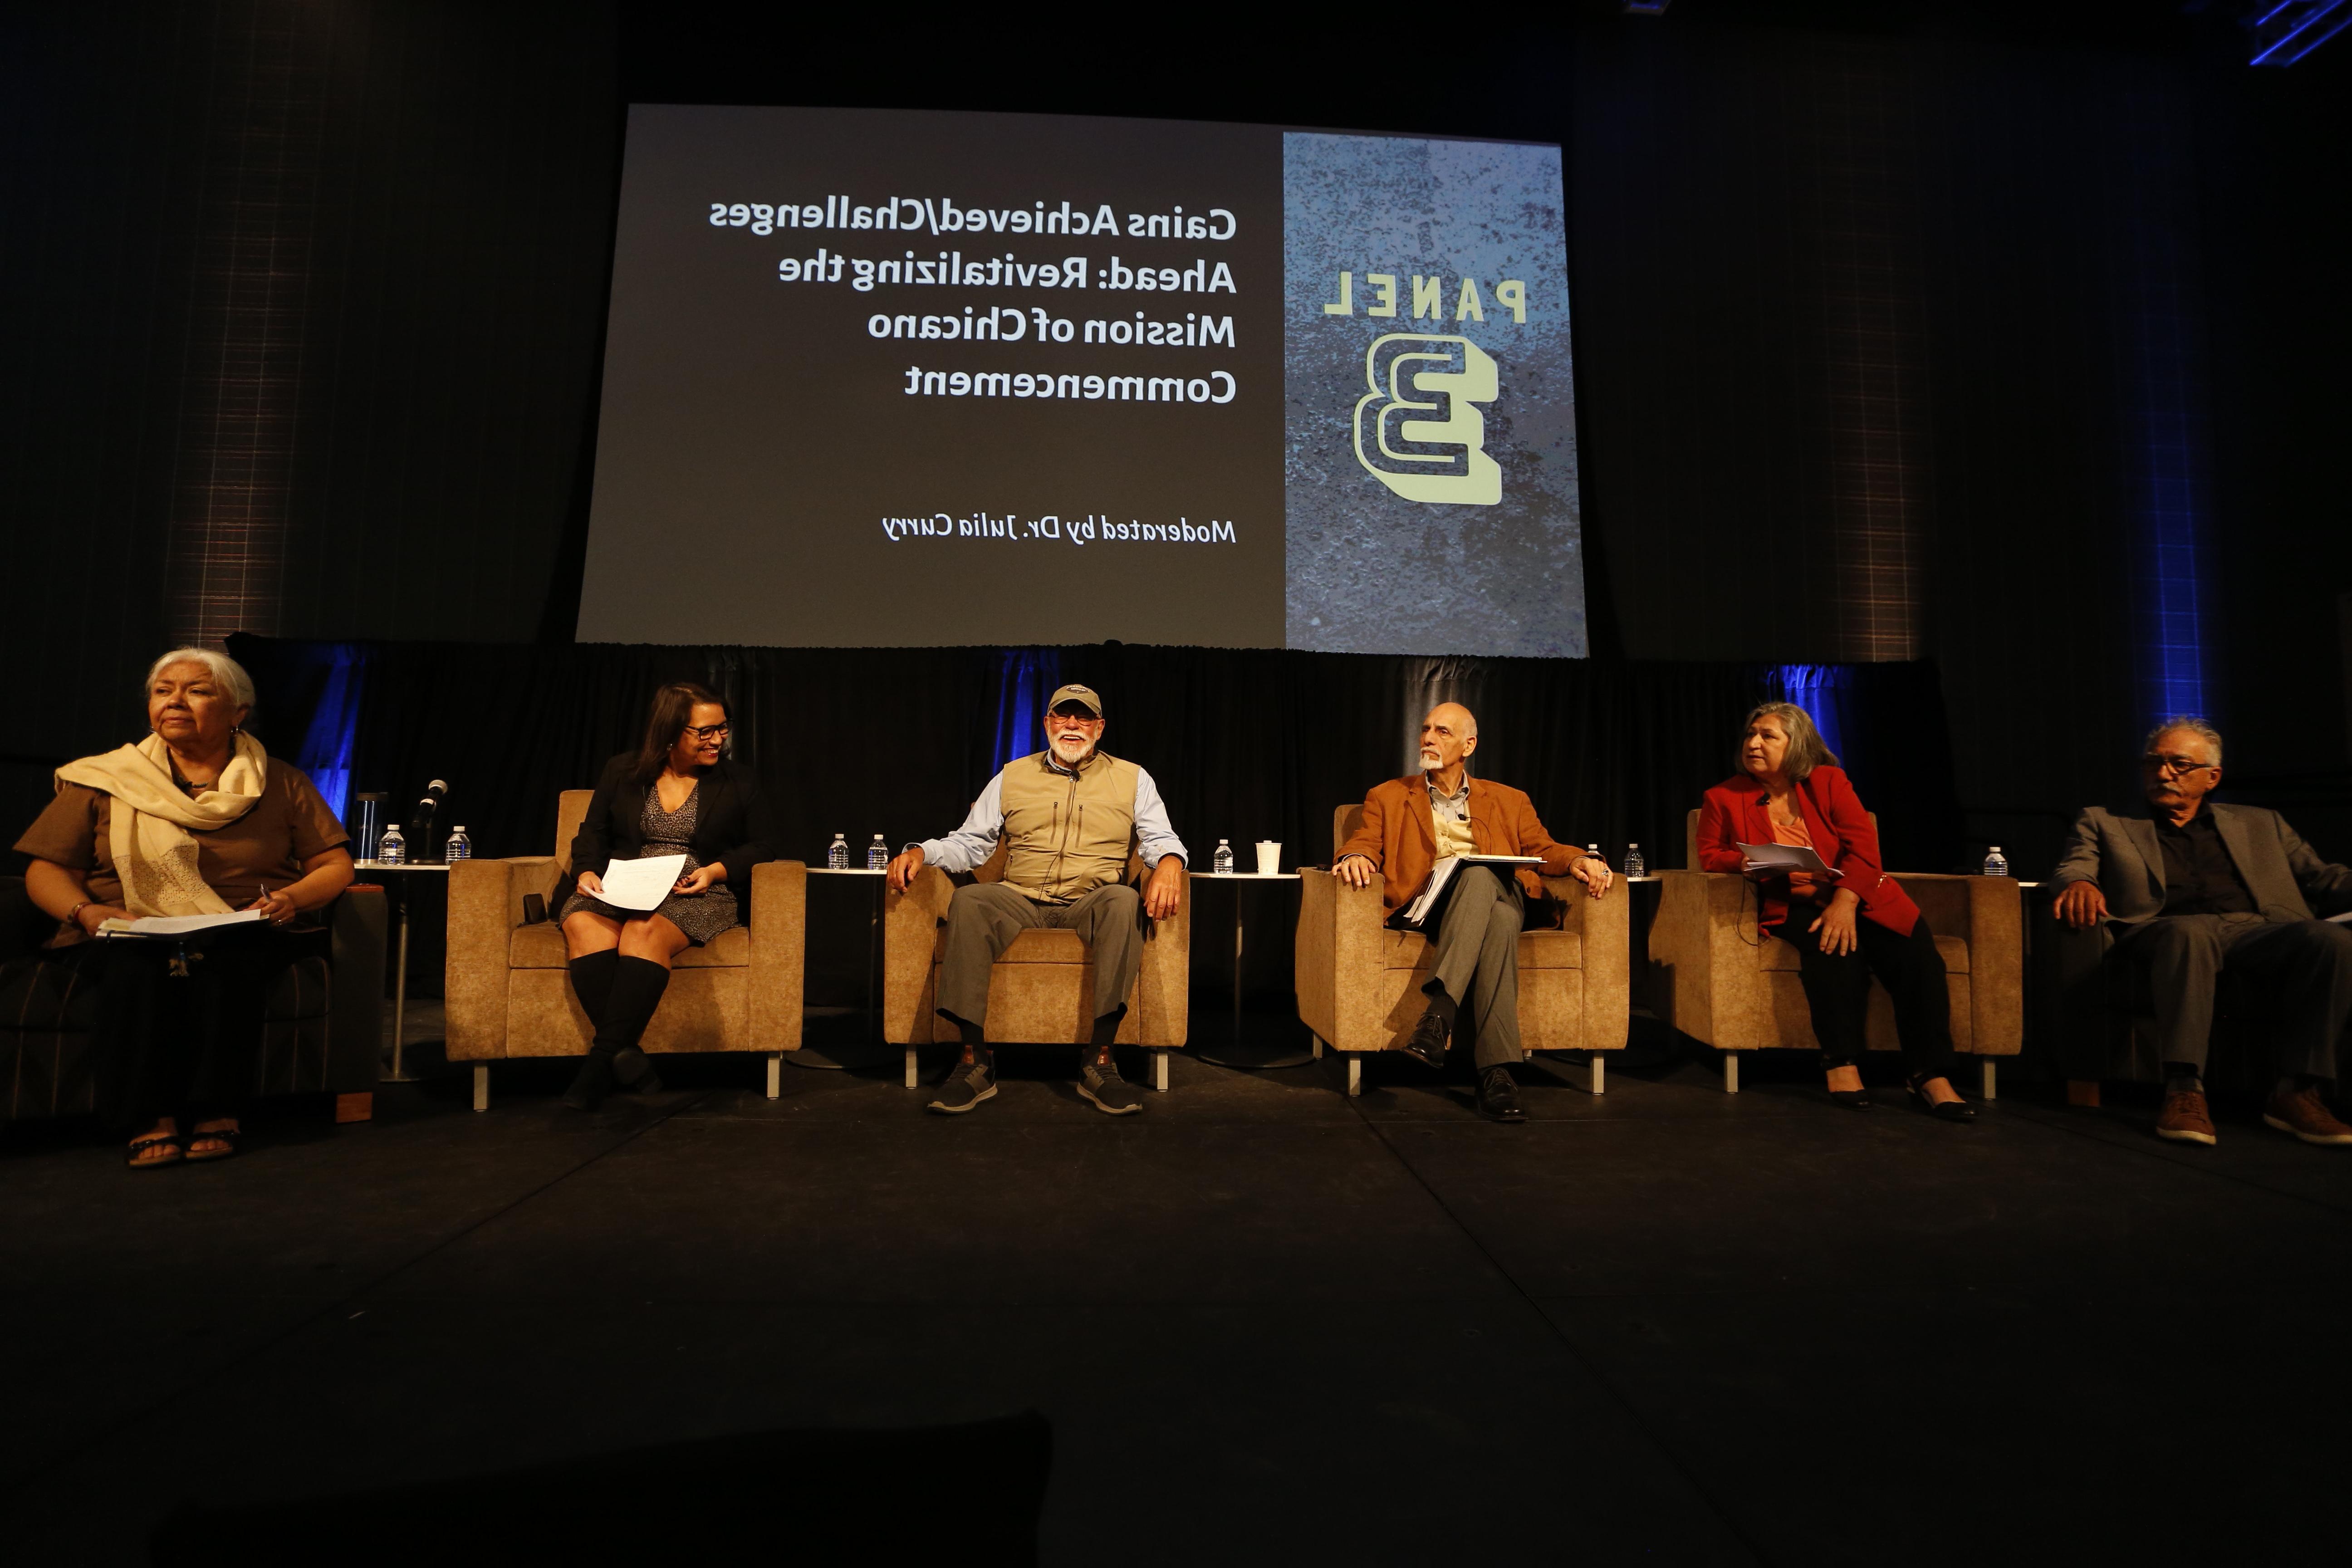 A group of older and younger alumni sit as a panel on stage in front of a screen.